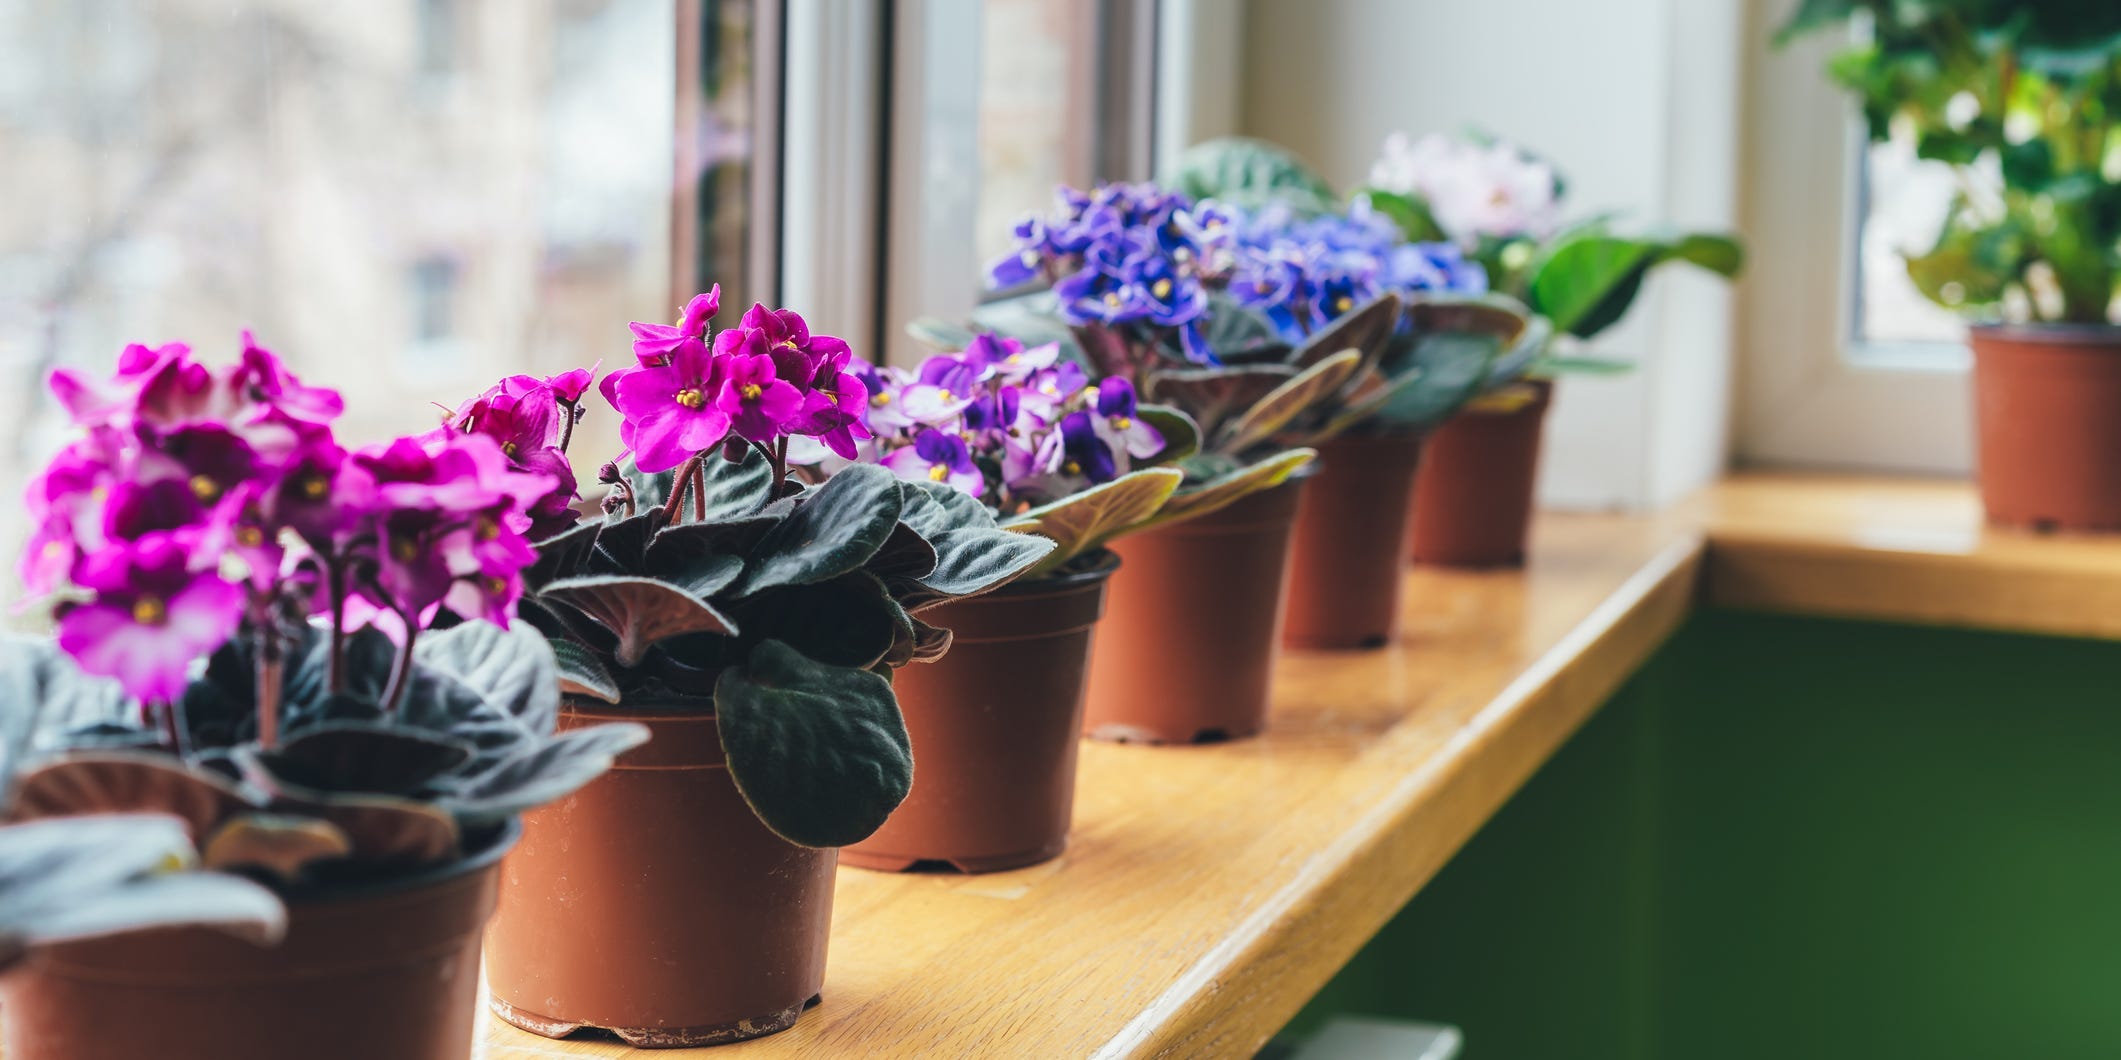 African violet plants on a windowsill